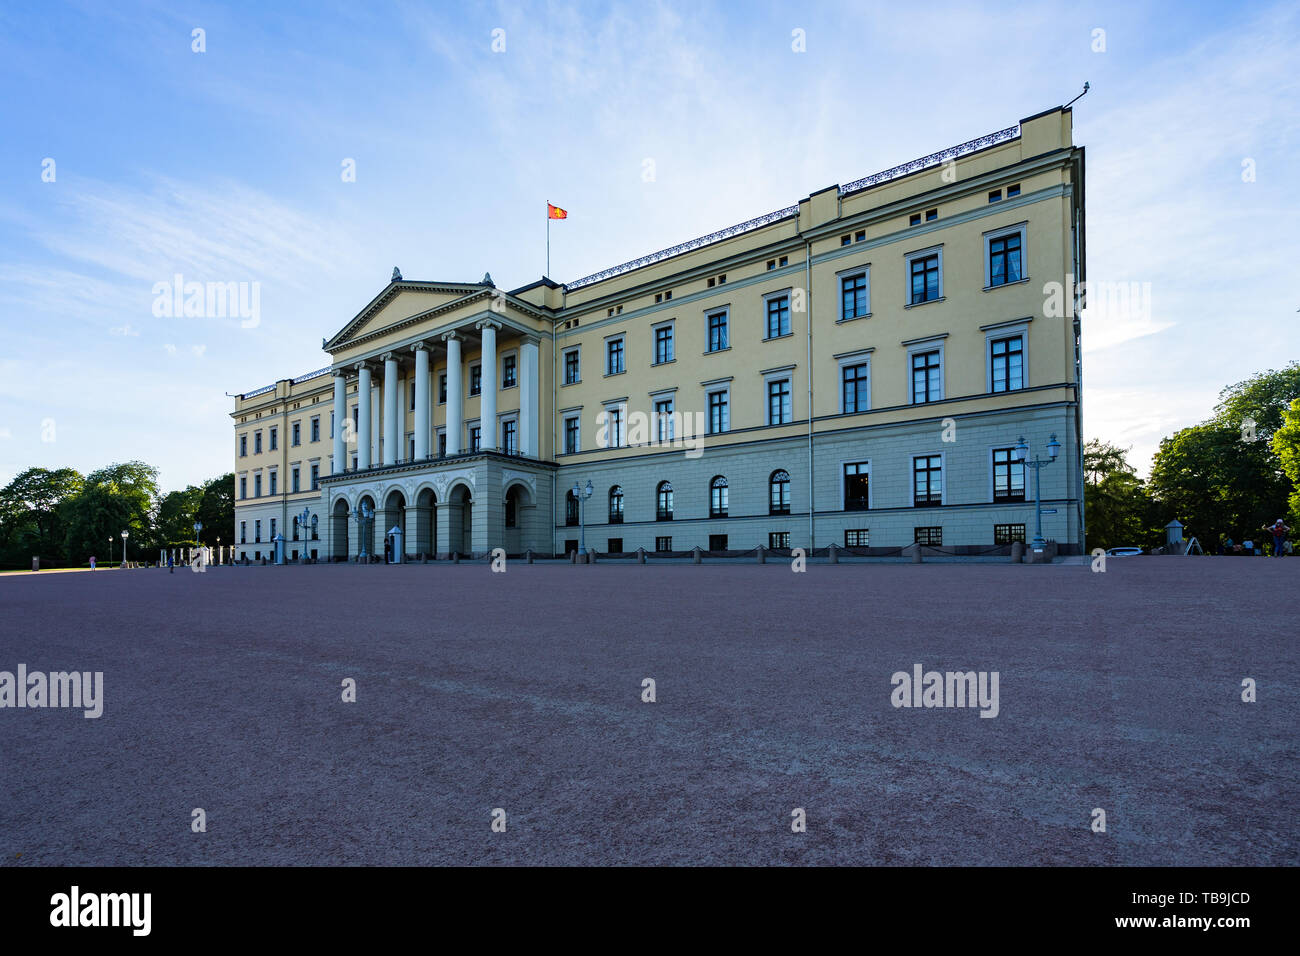 Wide angle view of Oslo Royal Palace (Slottet) facade, the official residence of the King of Norway Stock Photo